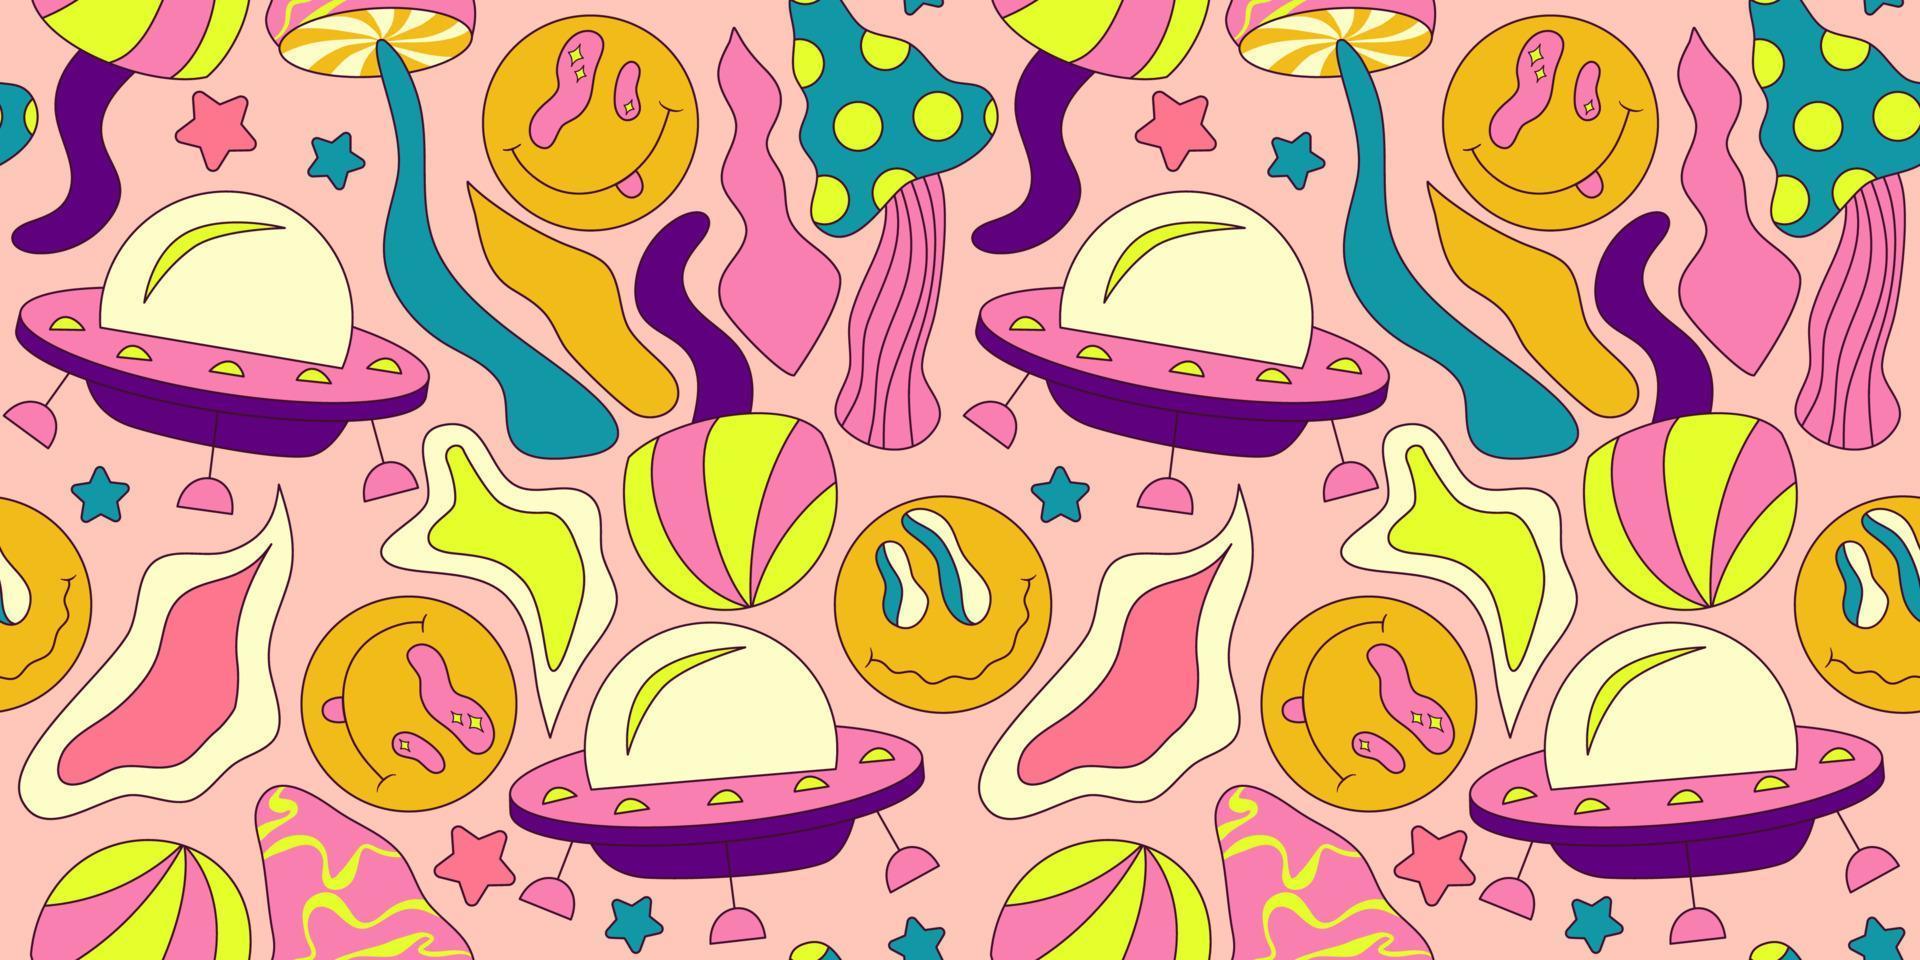 A pink background with a repeating pattern of cartoon aliens, flying saucers, and peace signs. - Smile, mushroom